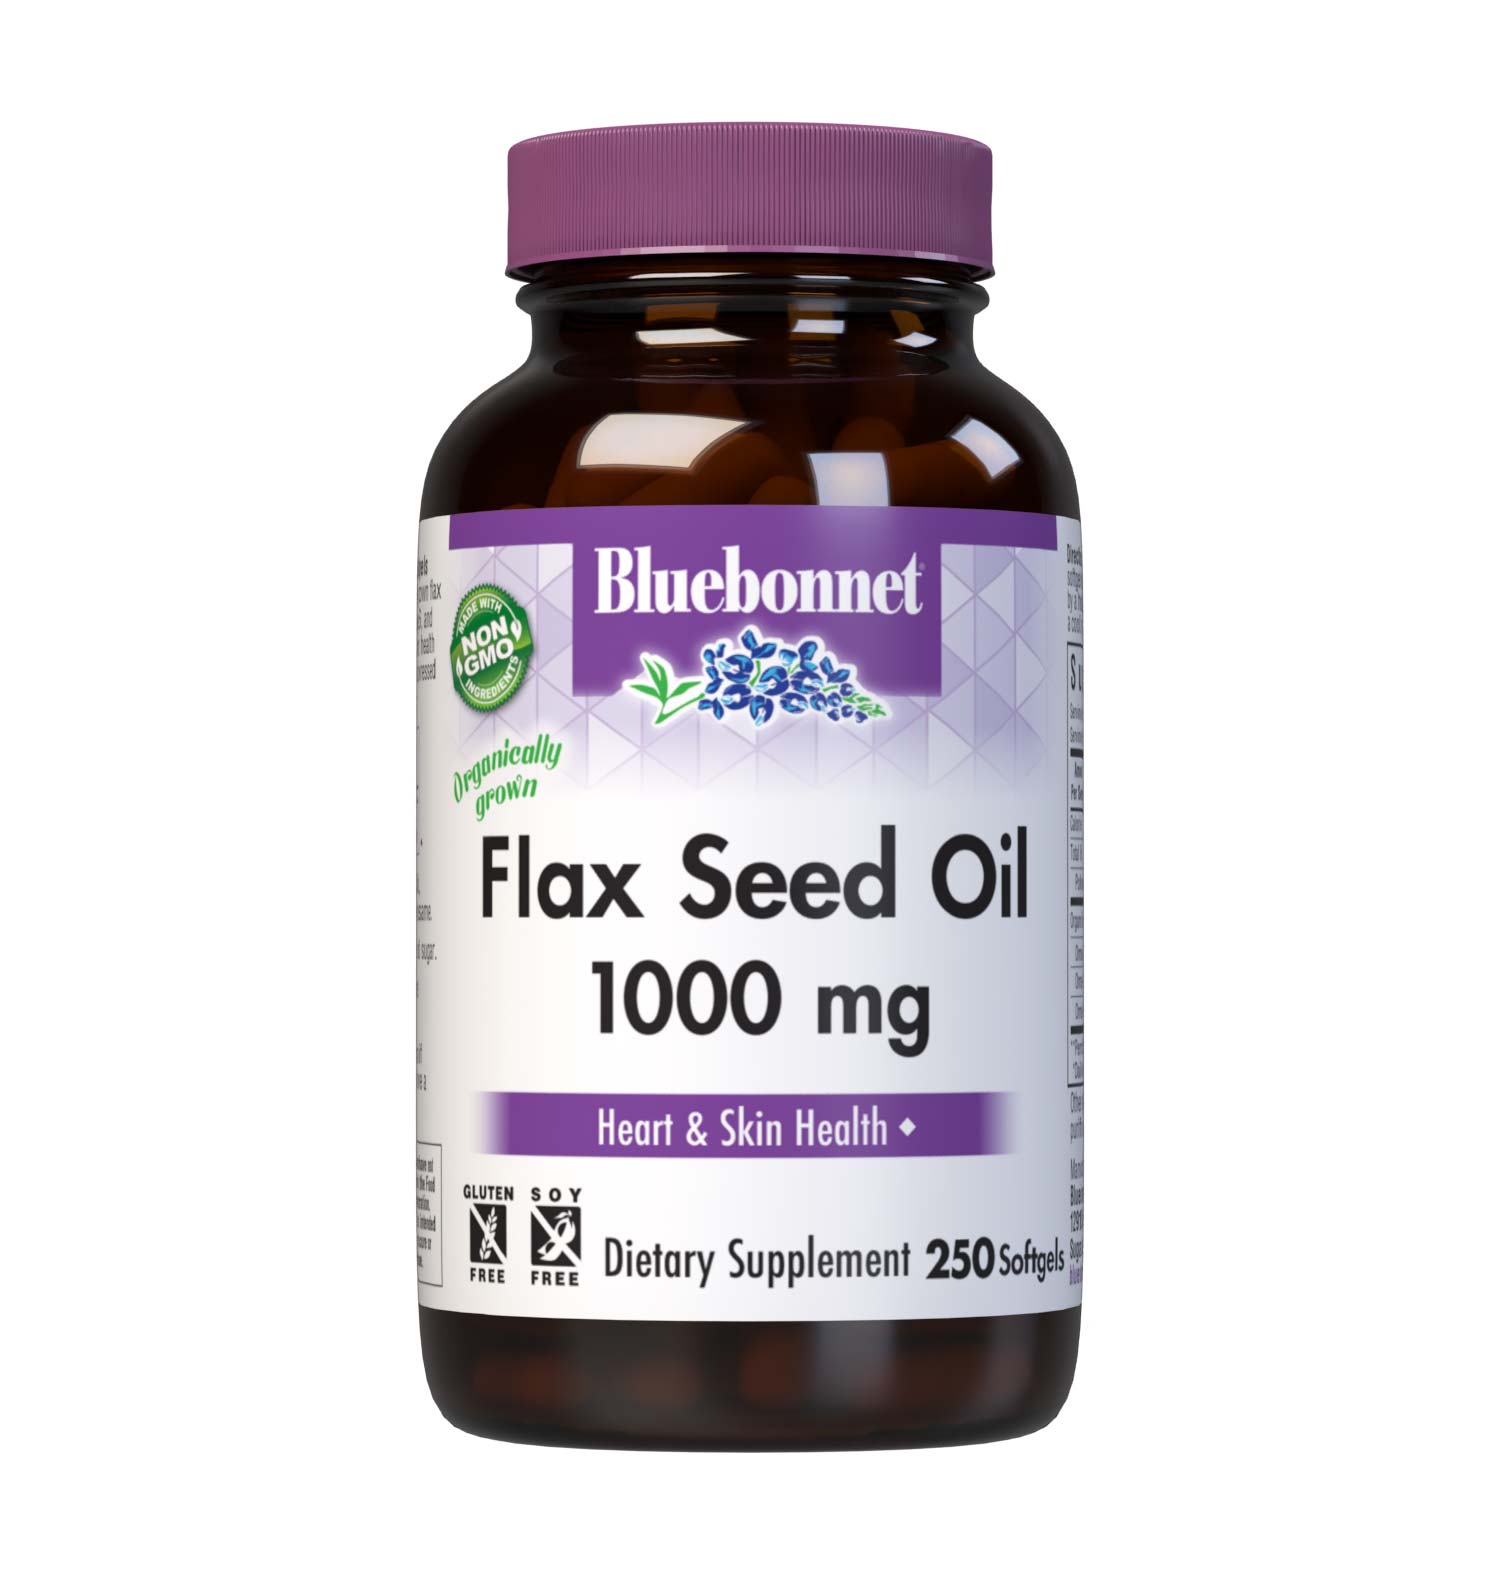 Bluebonnet’s Flax Seed Oil 1000 mg Softgels are formulated with certified organically grown flax seed, a known source of omega-3, omega-6and omega-9 fatty acids that help support cardiovascular health and the maintenance of healthy skin. Cold pressed without the use of chemical solvents. #size_250 count